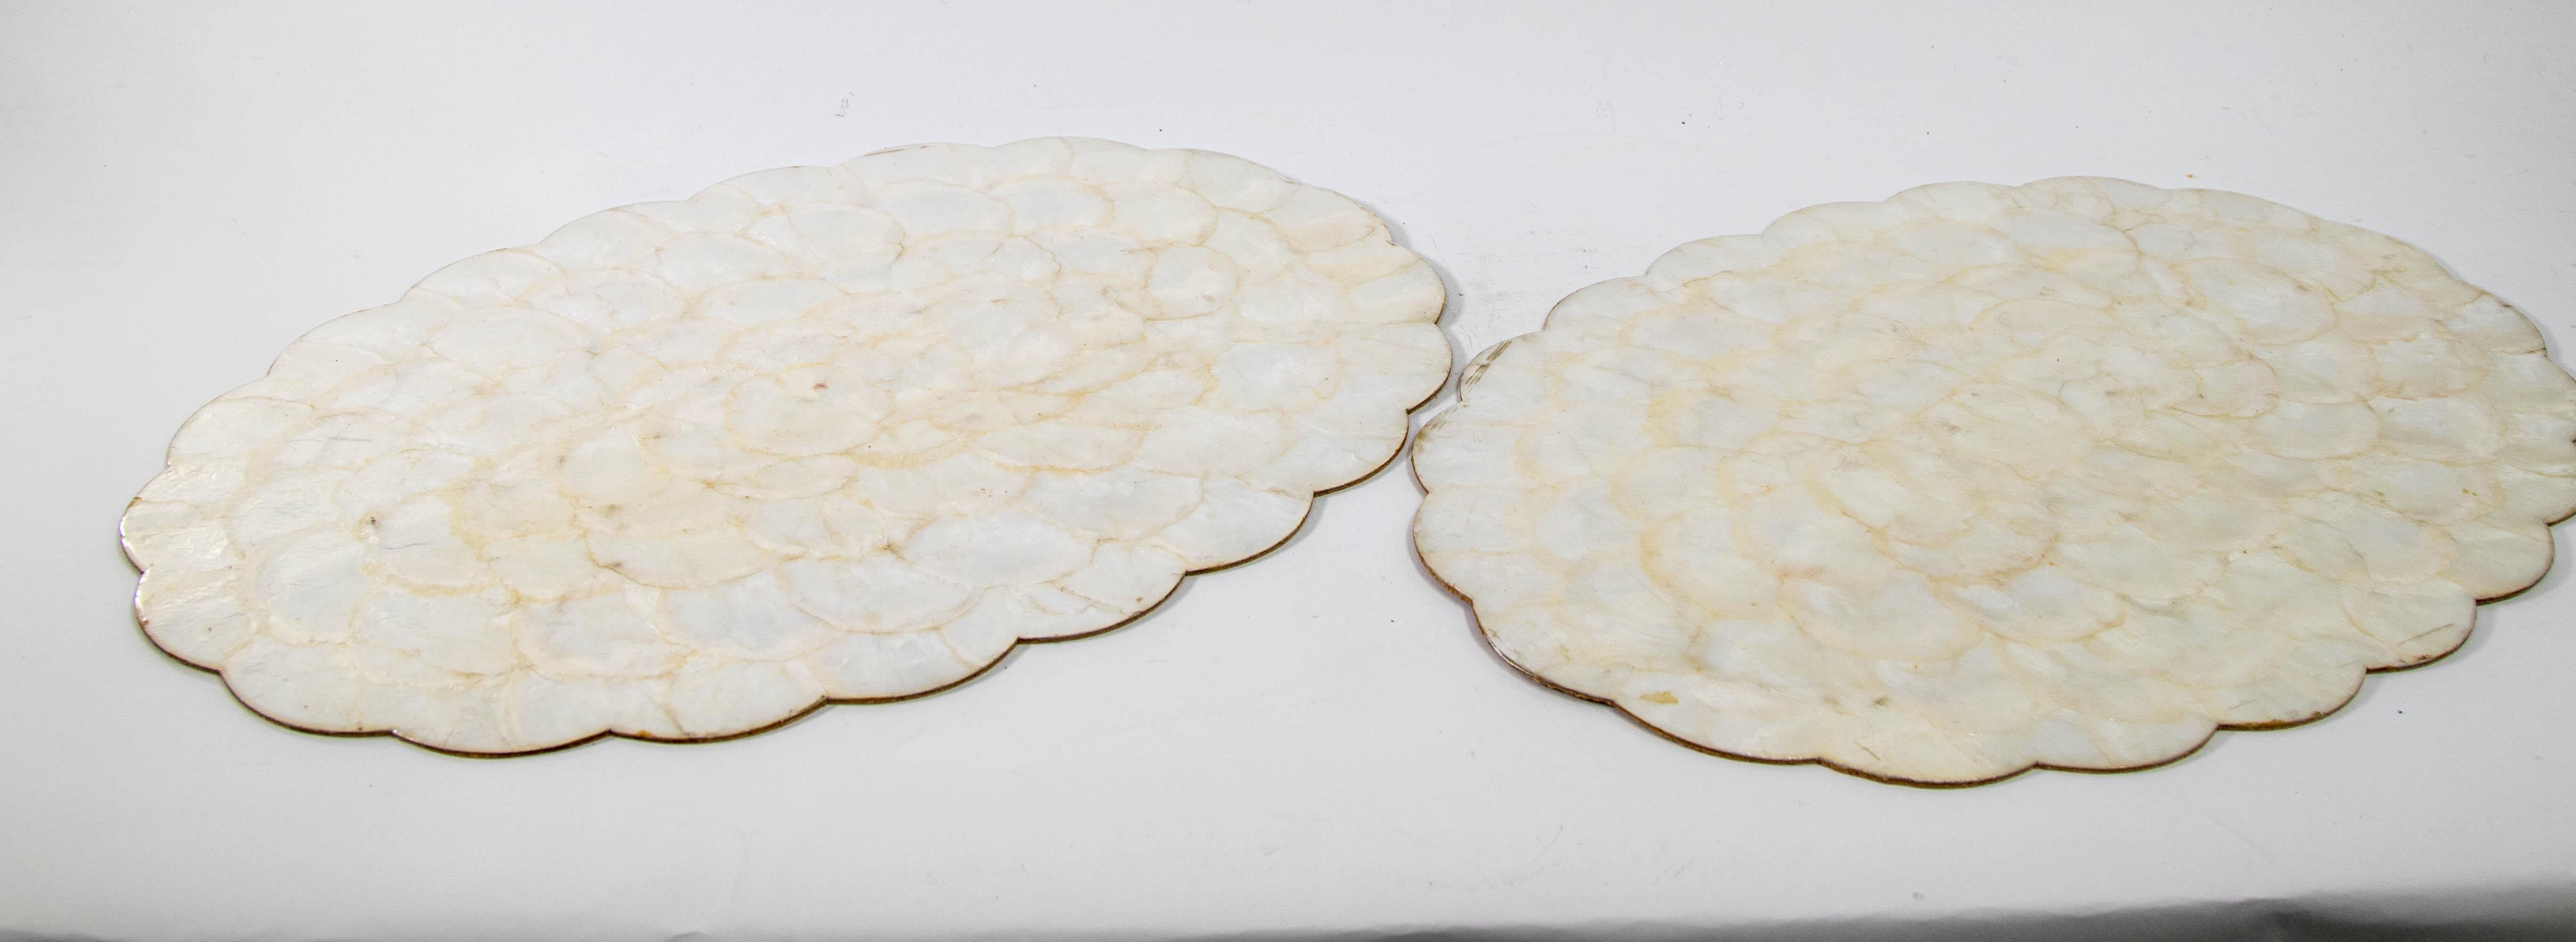 Vintage Hallie St Mary placemats, set of two capiz, abalone, pearl shell design scalloped edge oval placemats.
Luminous, beautiful mother of pearl shell color.
The reverse of these placemats is cork.
These would make a beautiful, tropical and